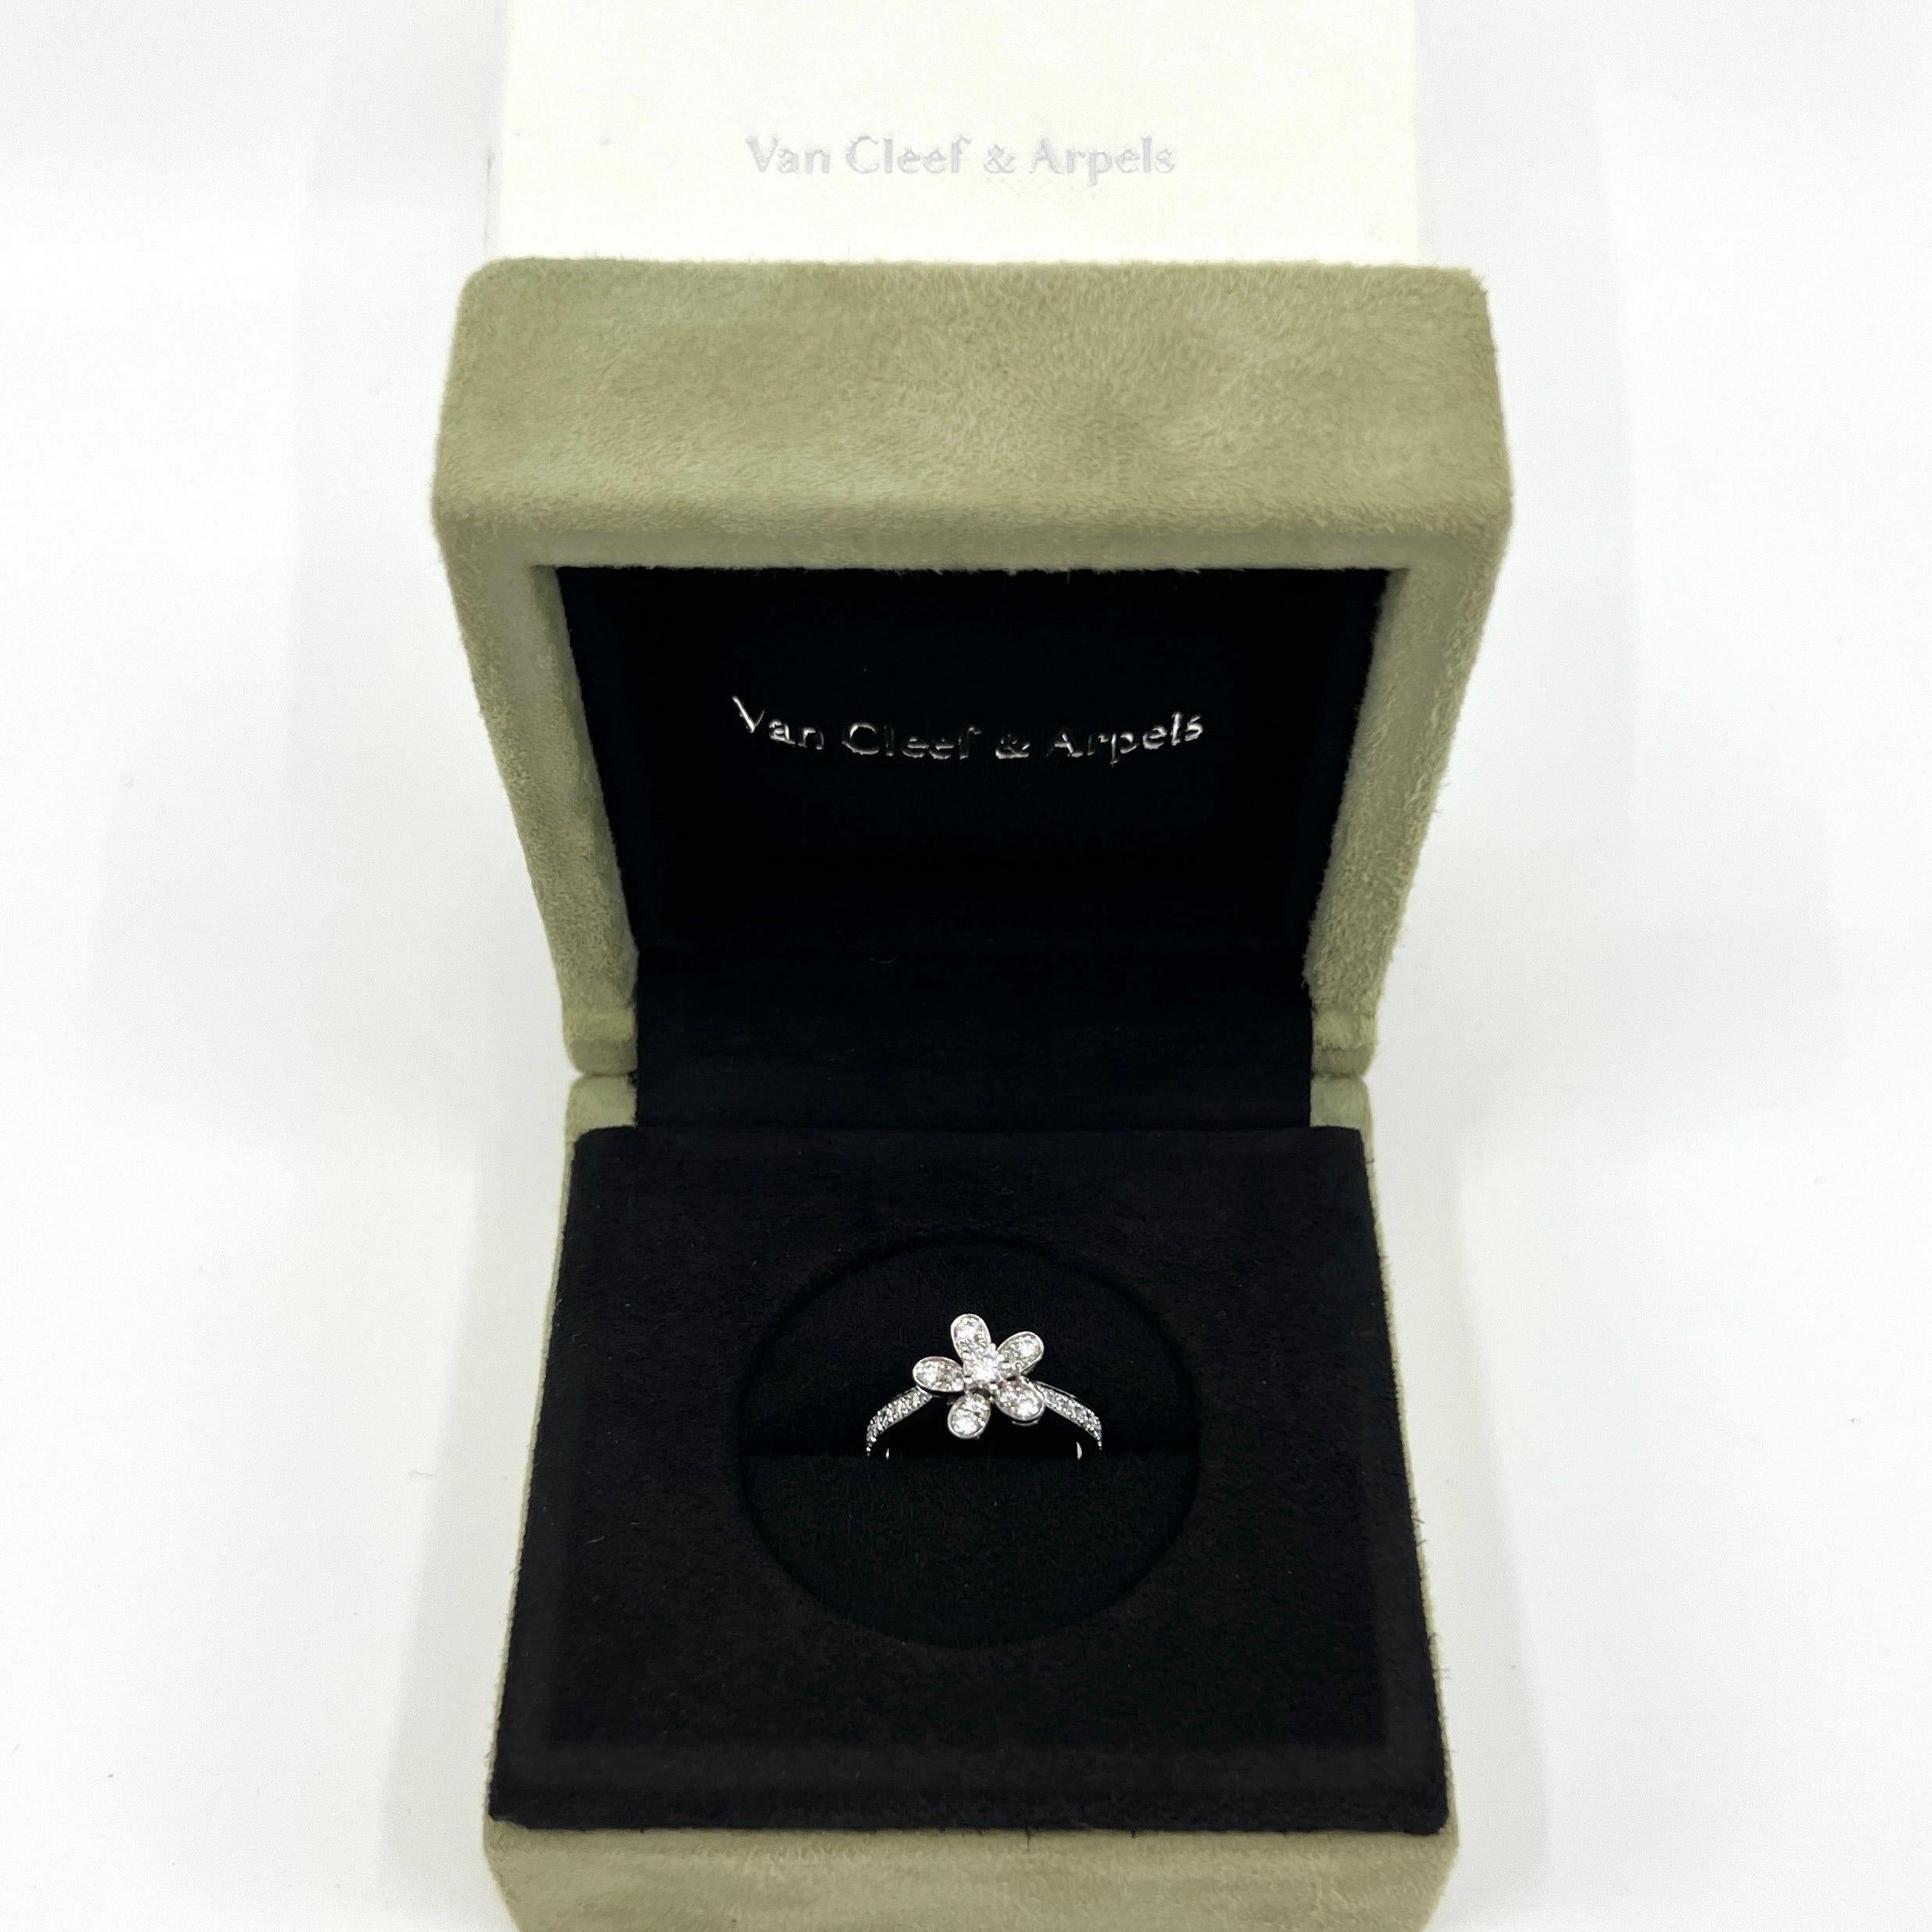 Rare Vintage Van Cleef & Arpels Socrate Diamond 18 Karat White Gold Ring.

A stunning vintage ring from the Socrate range by fine French fine jewellery house Van Cleef & Arpels. 

The classic flower motif but filled with stunning pavé set natural